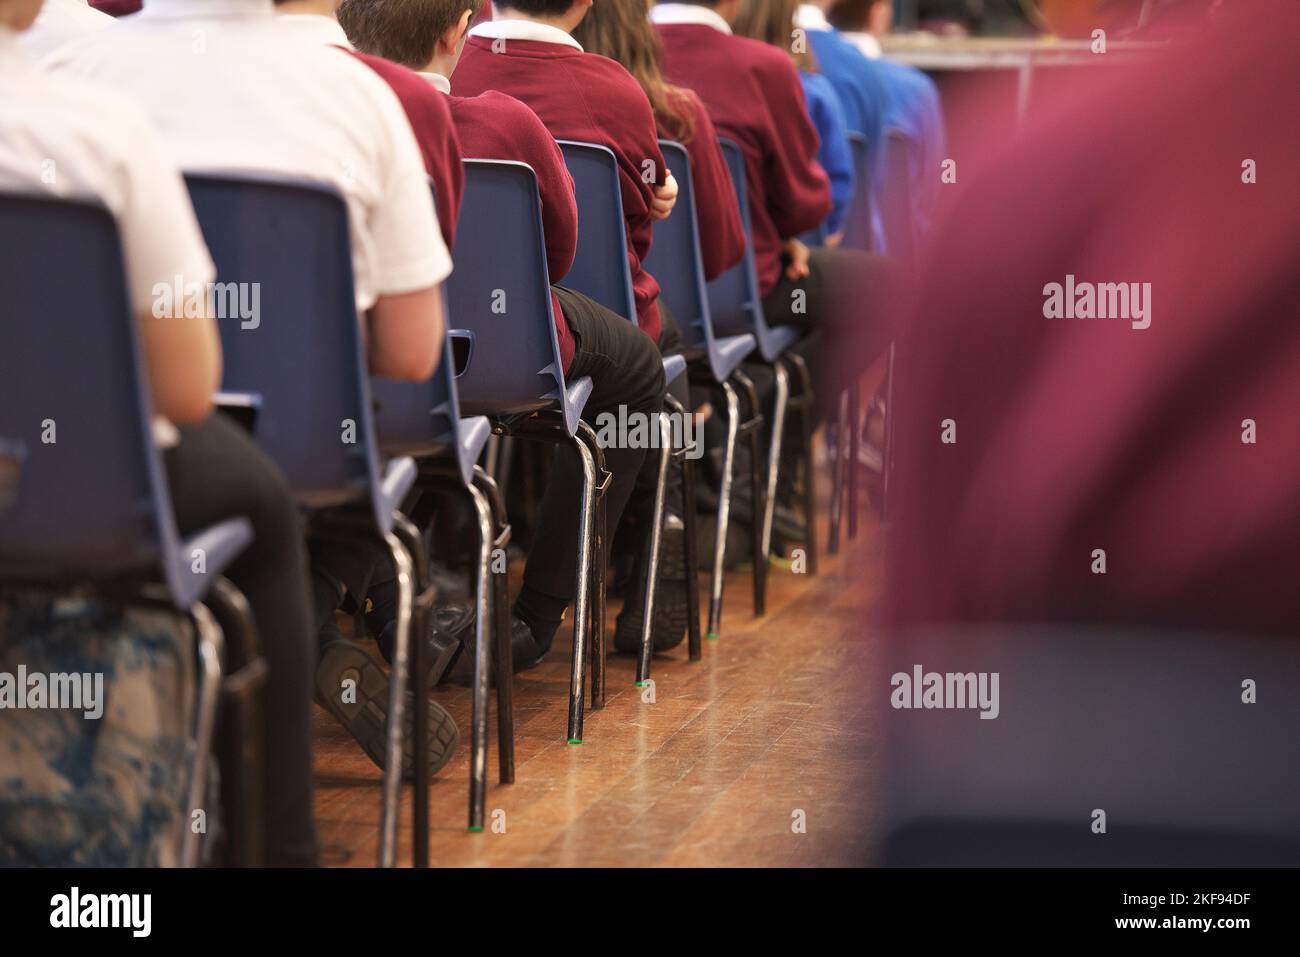 Young Schoolchildren sitting in school assembly listening to teacher Stock Photo